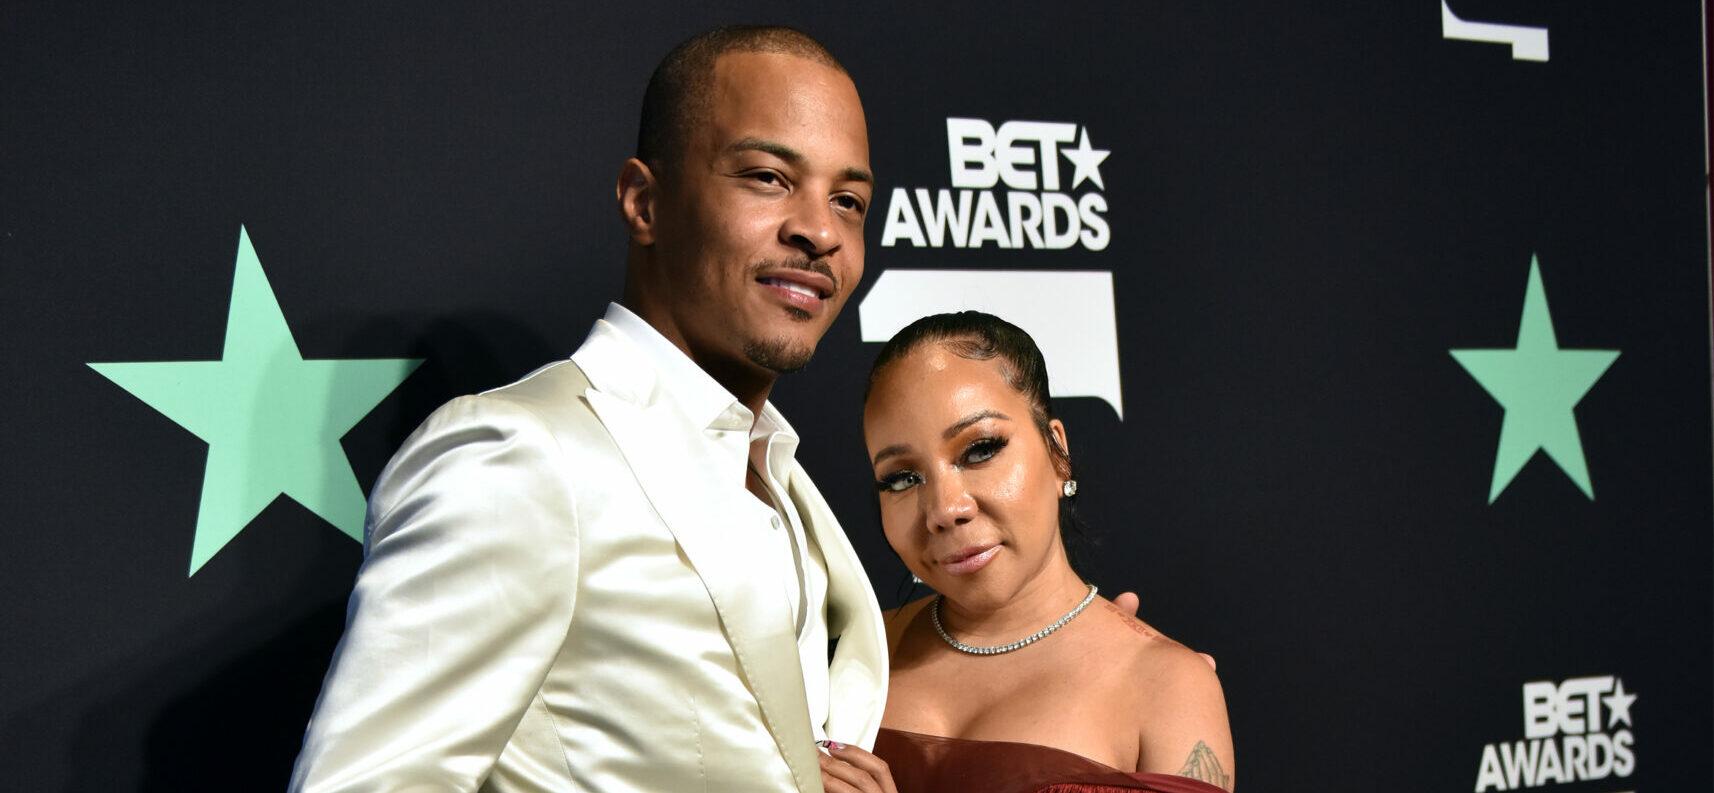 T.I. and Tiny Break Their Silence After Being Sued For Sexual Assault